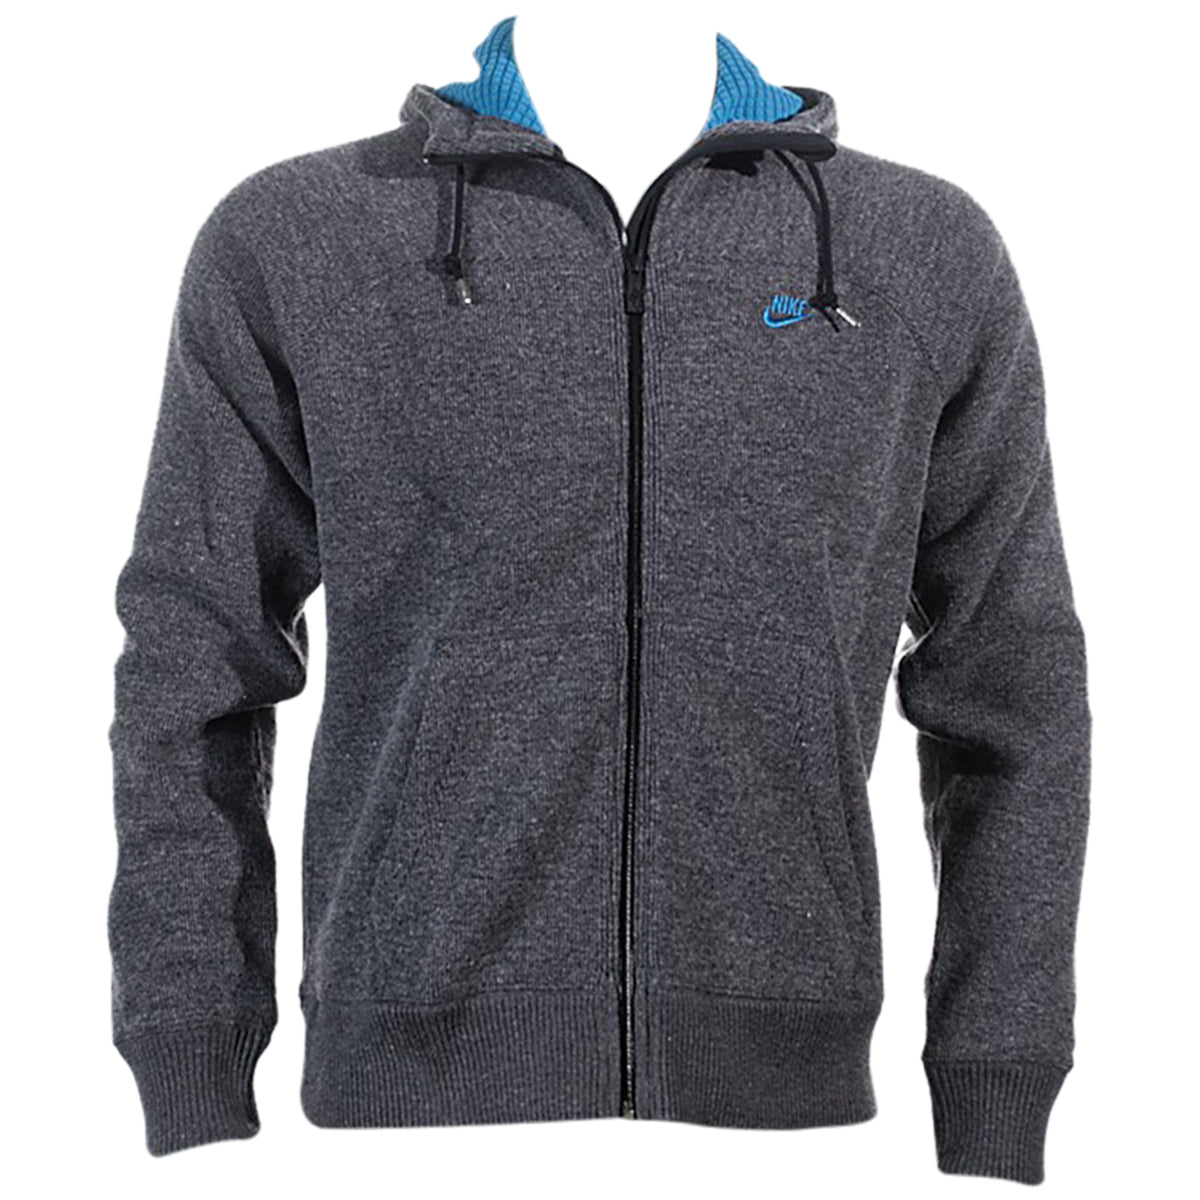 Nike Aw77 Ascent Wool Hoodie Mens Style : 439291